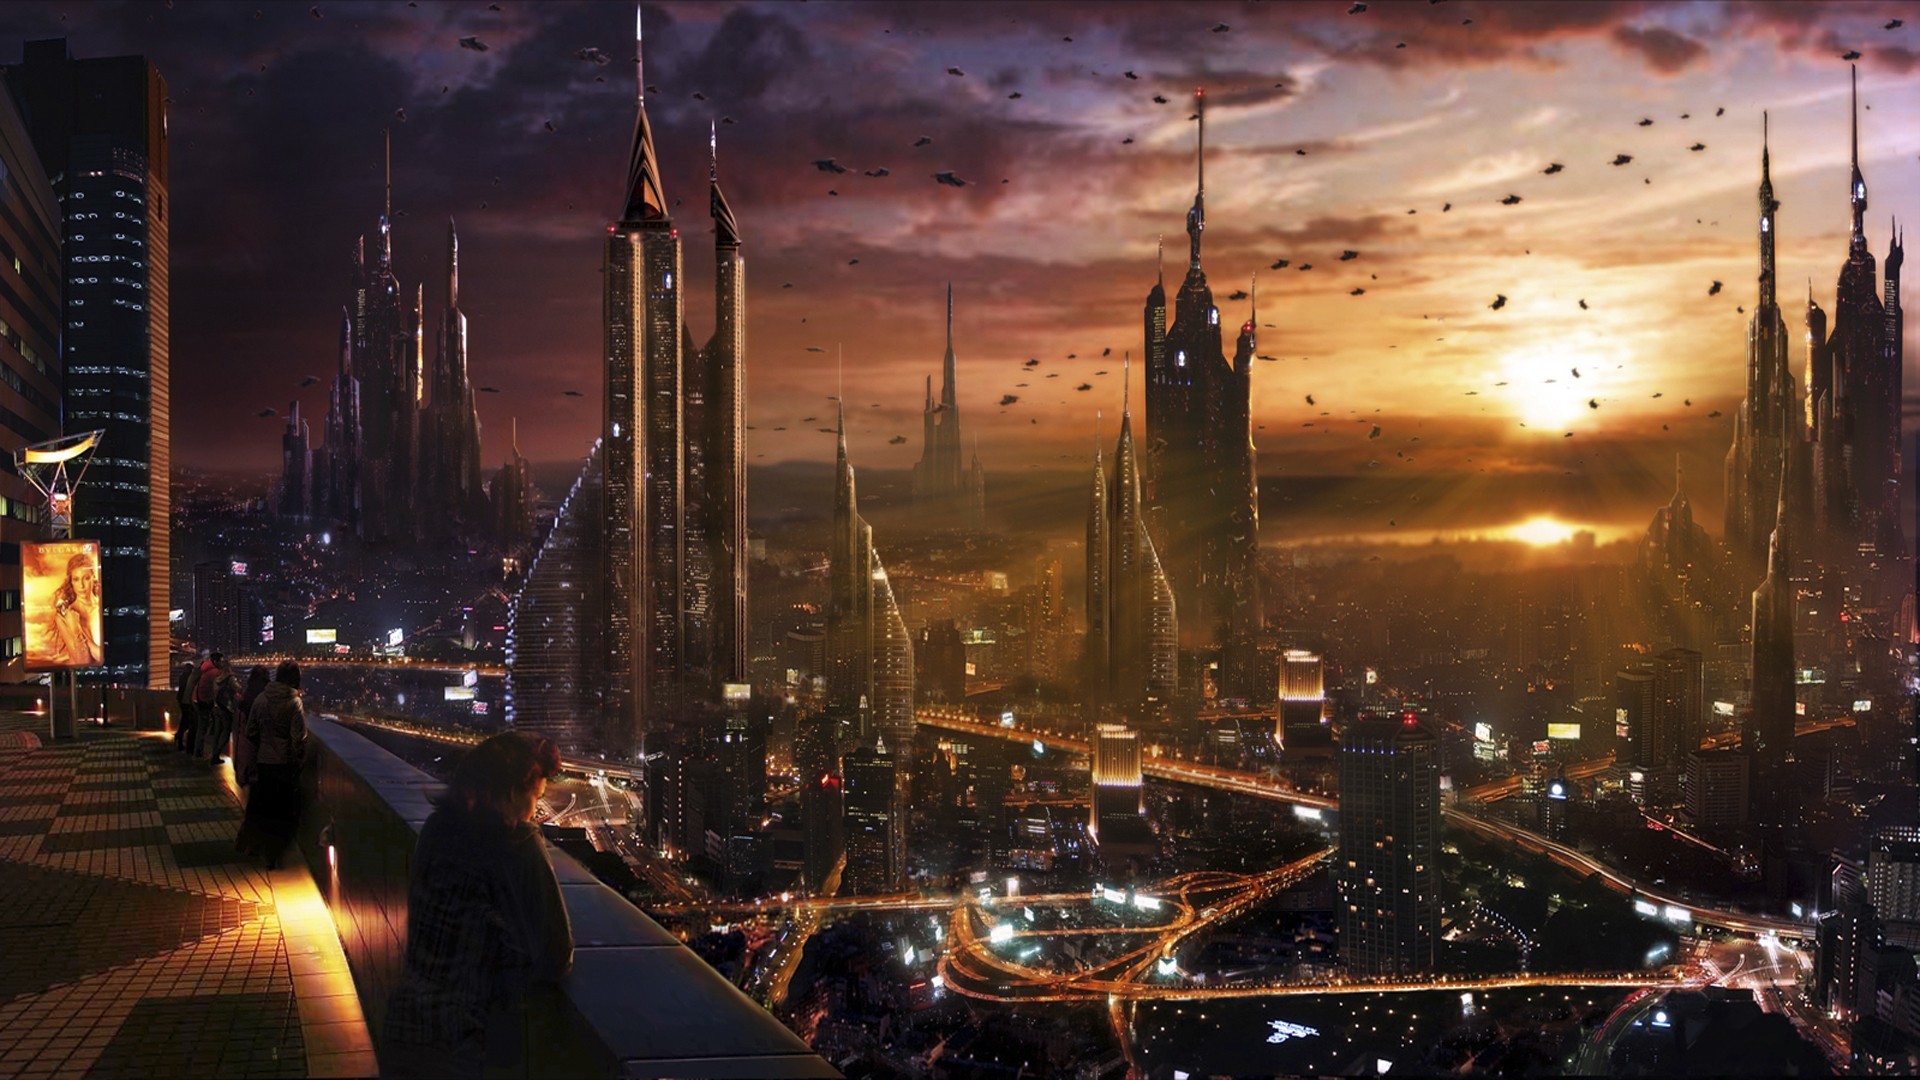 1920x1080 Search Results for “science fiction city wallpaper” – Adorable Wallpapers